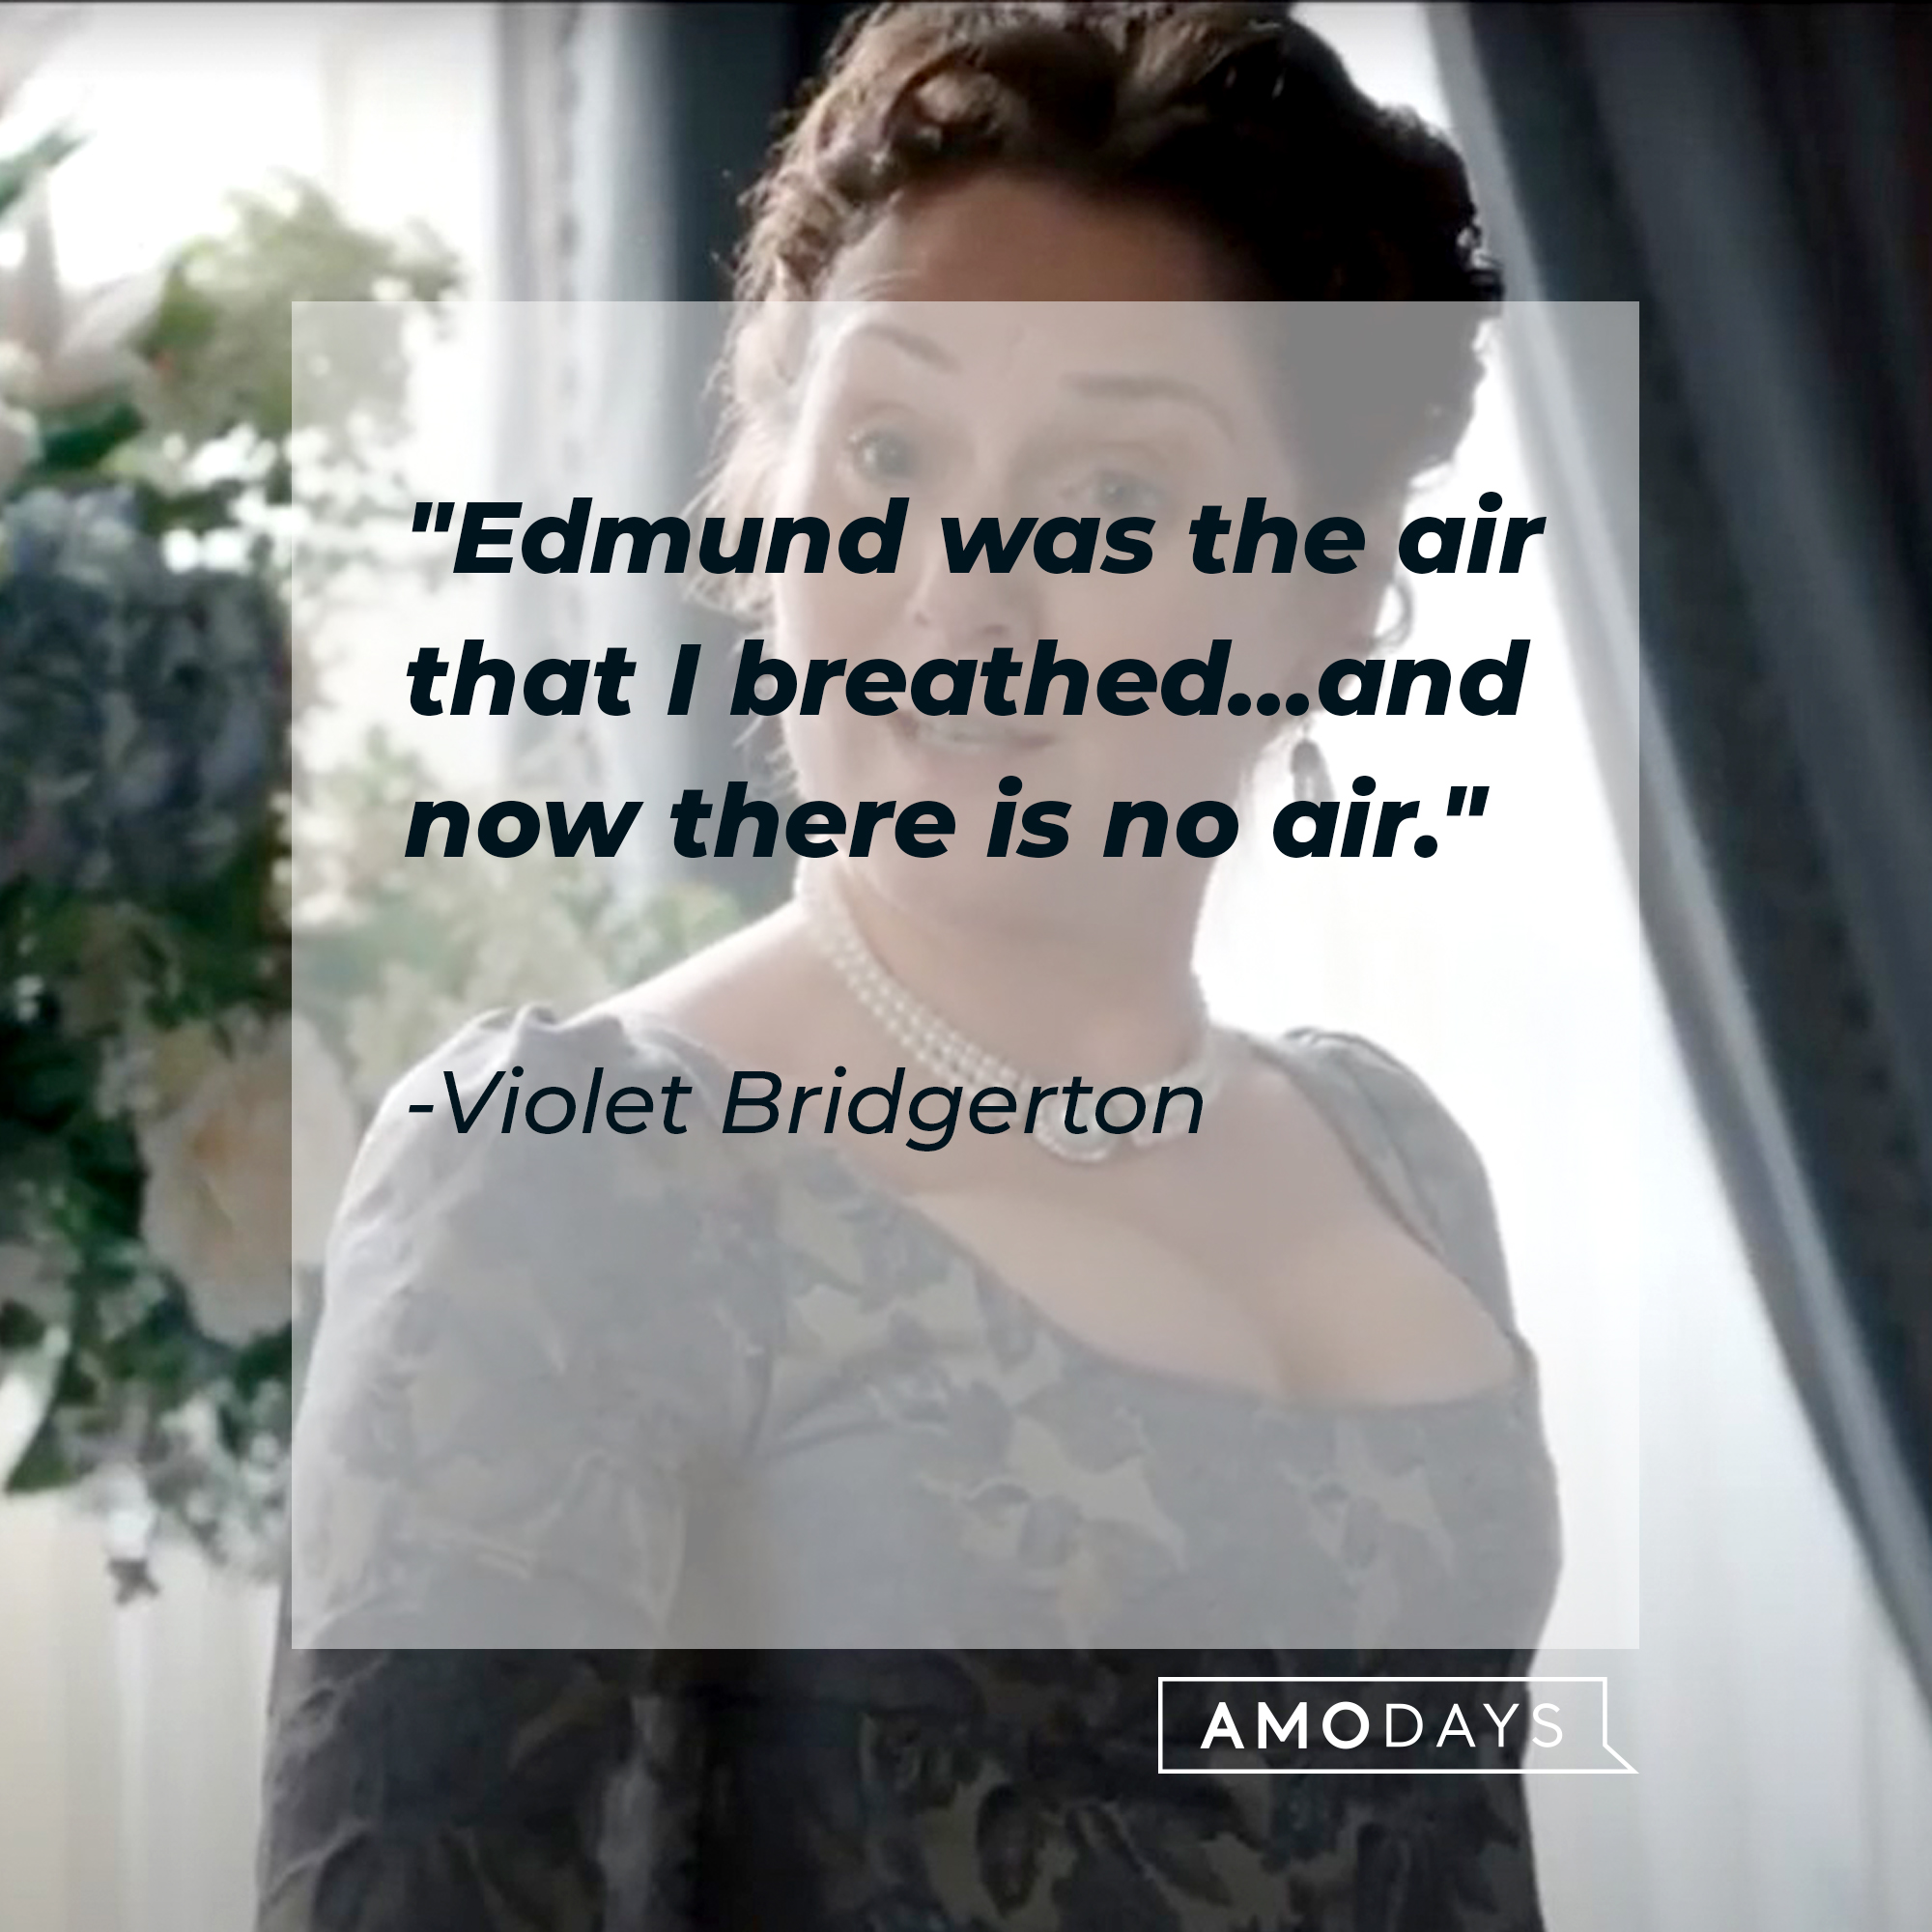 An image of Violet Bridgerton with her quote: "Edmund was the air that I breathed…and now there is no air.” │Source: youtube.com/Netflix